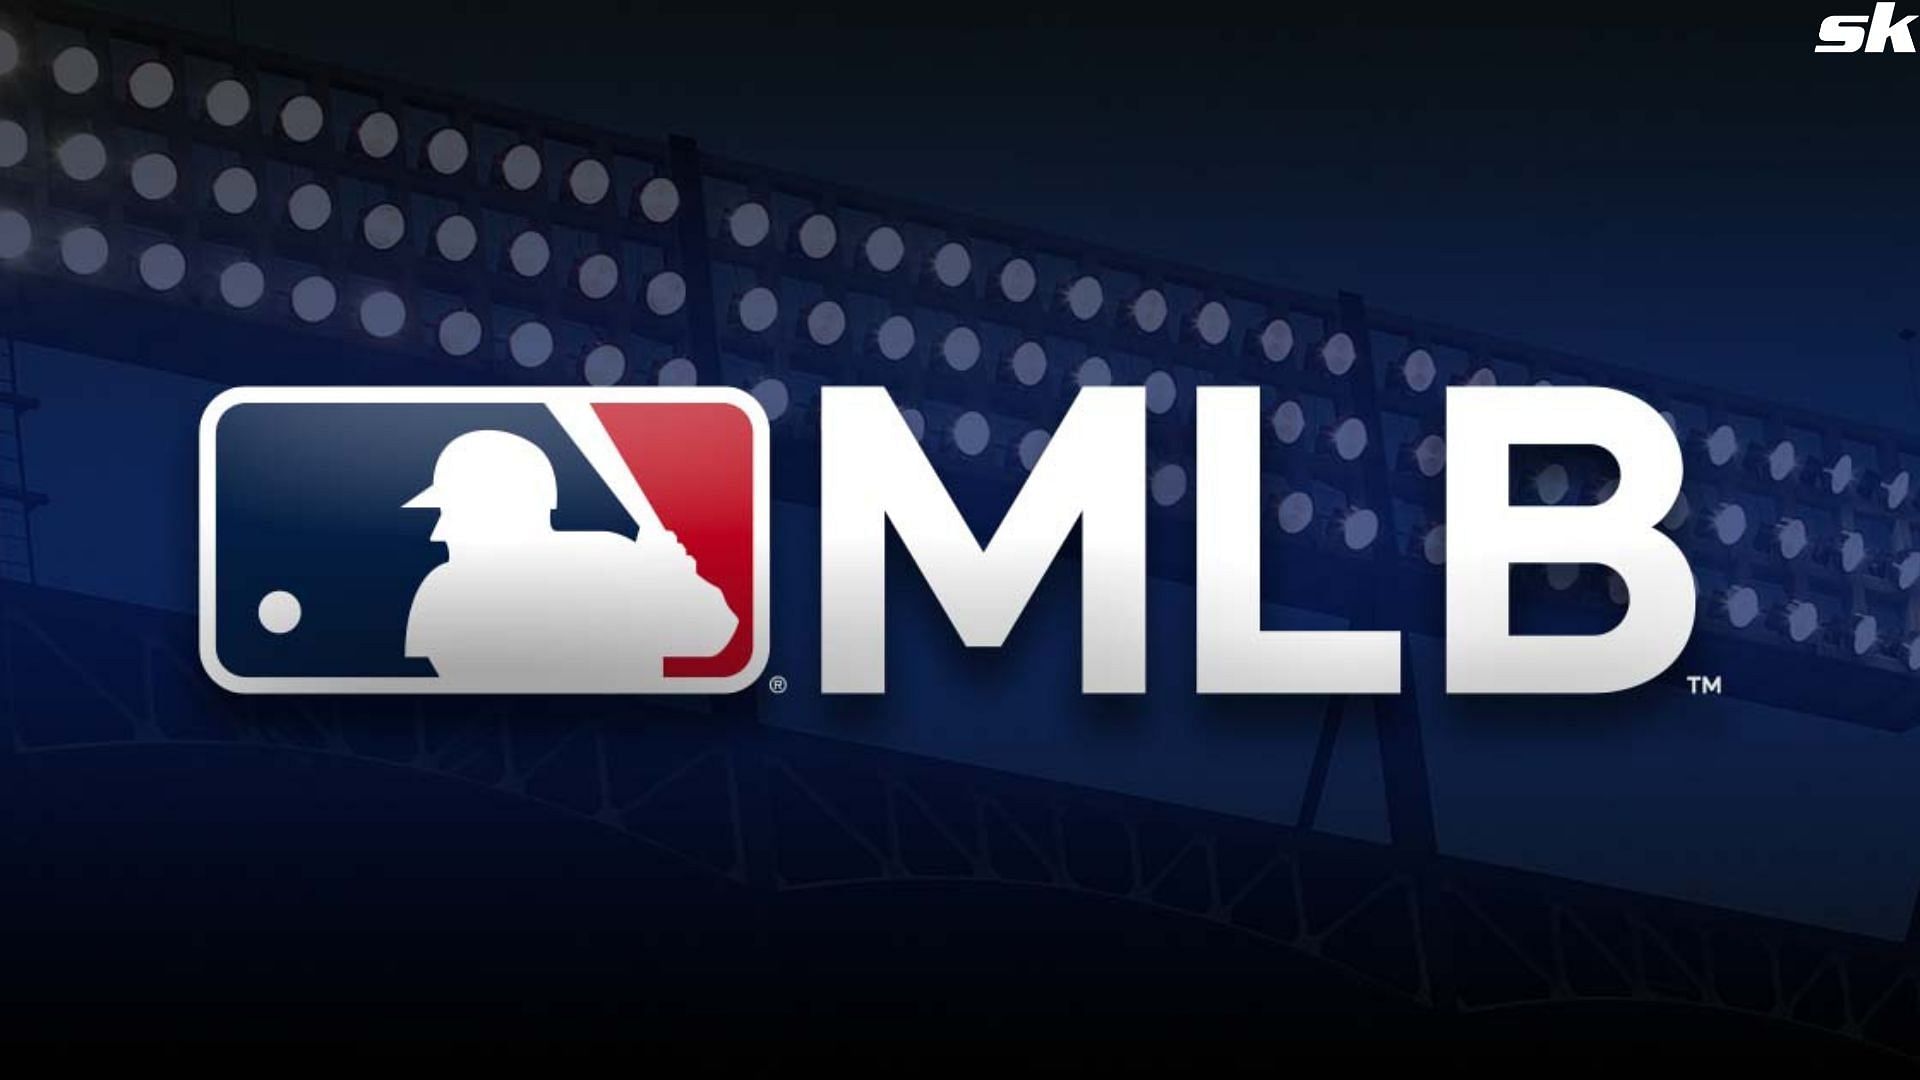 MLB.TV announces their annual free preview for fans